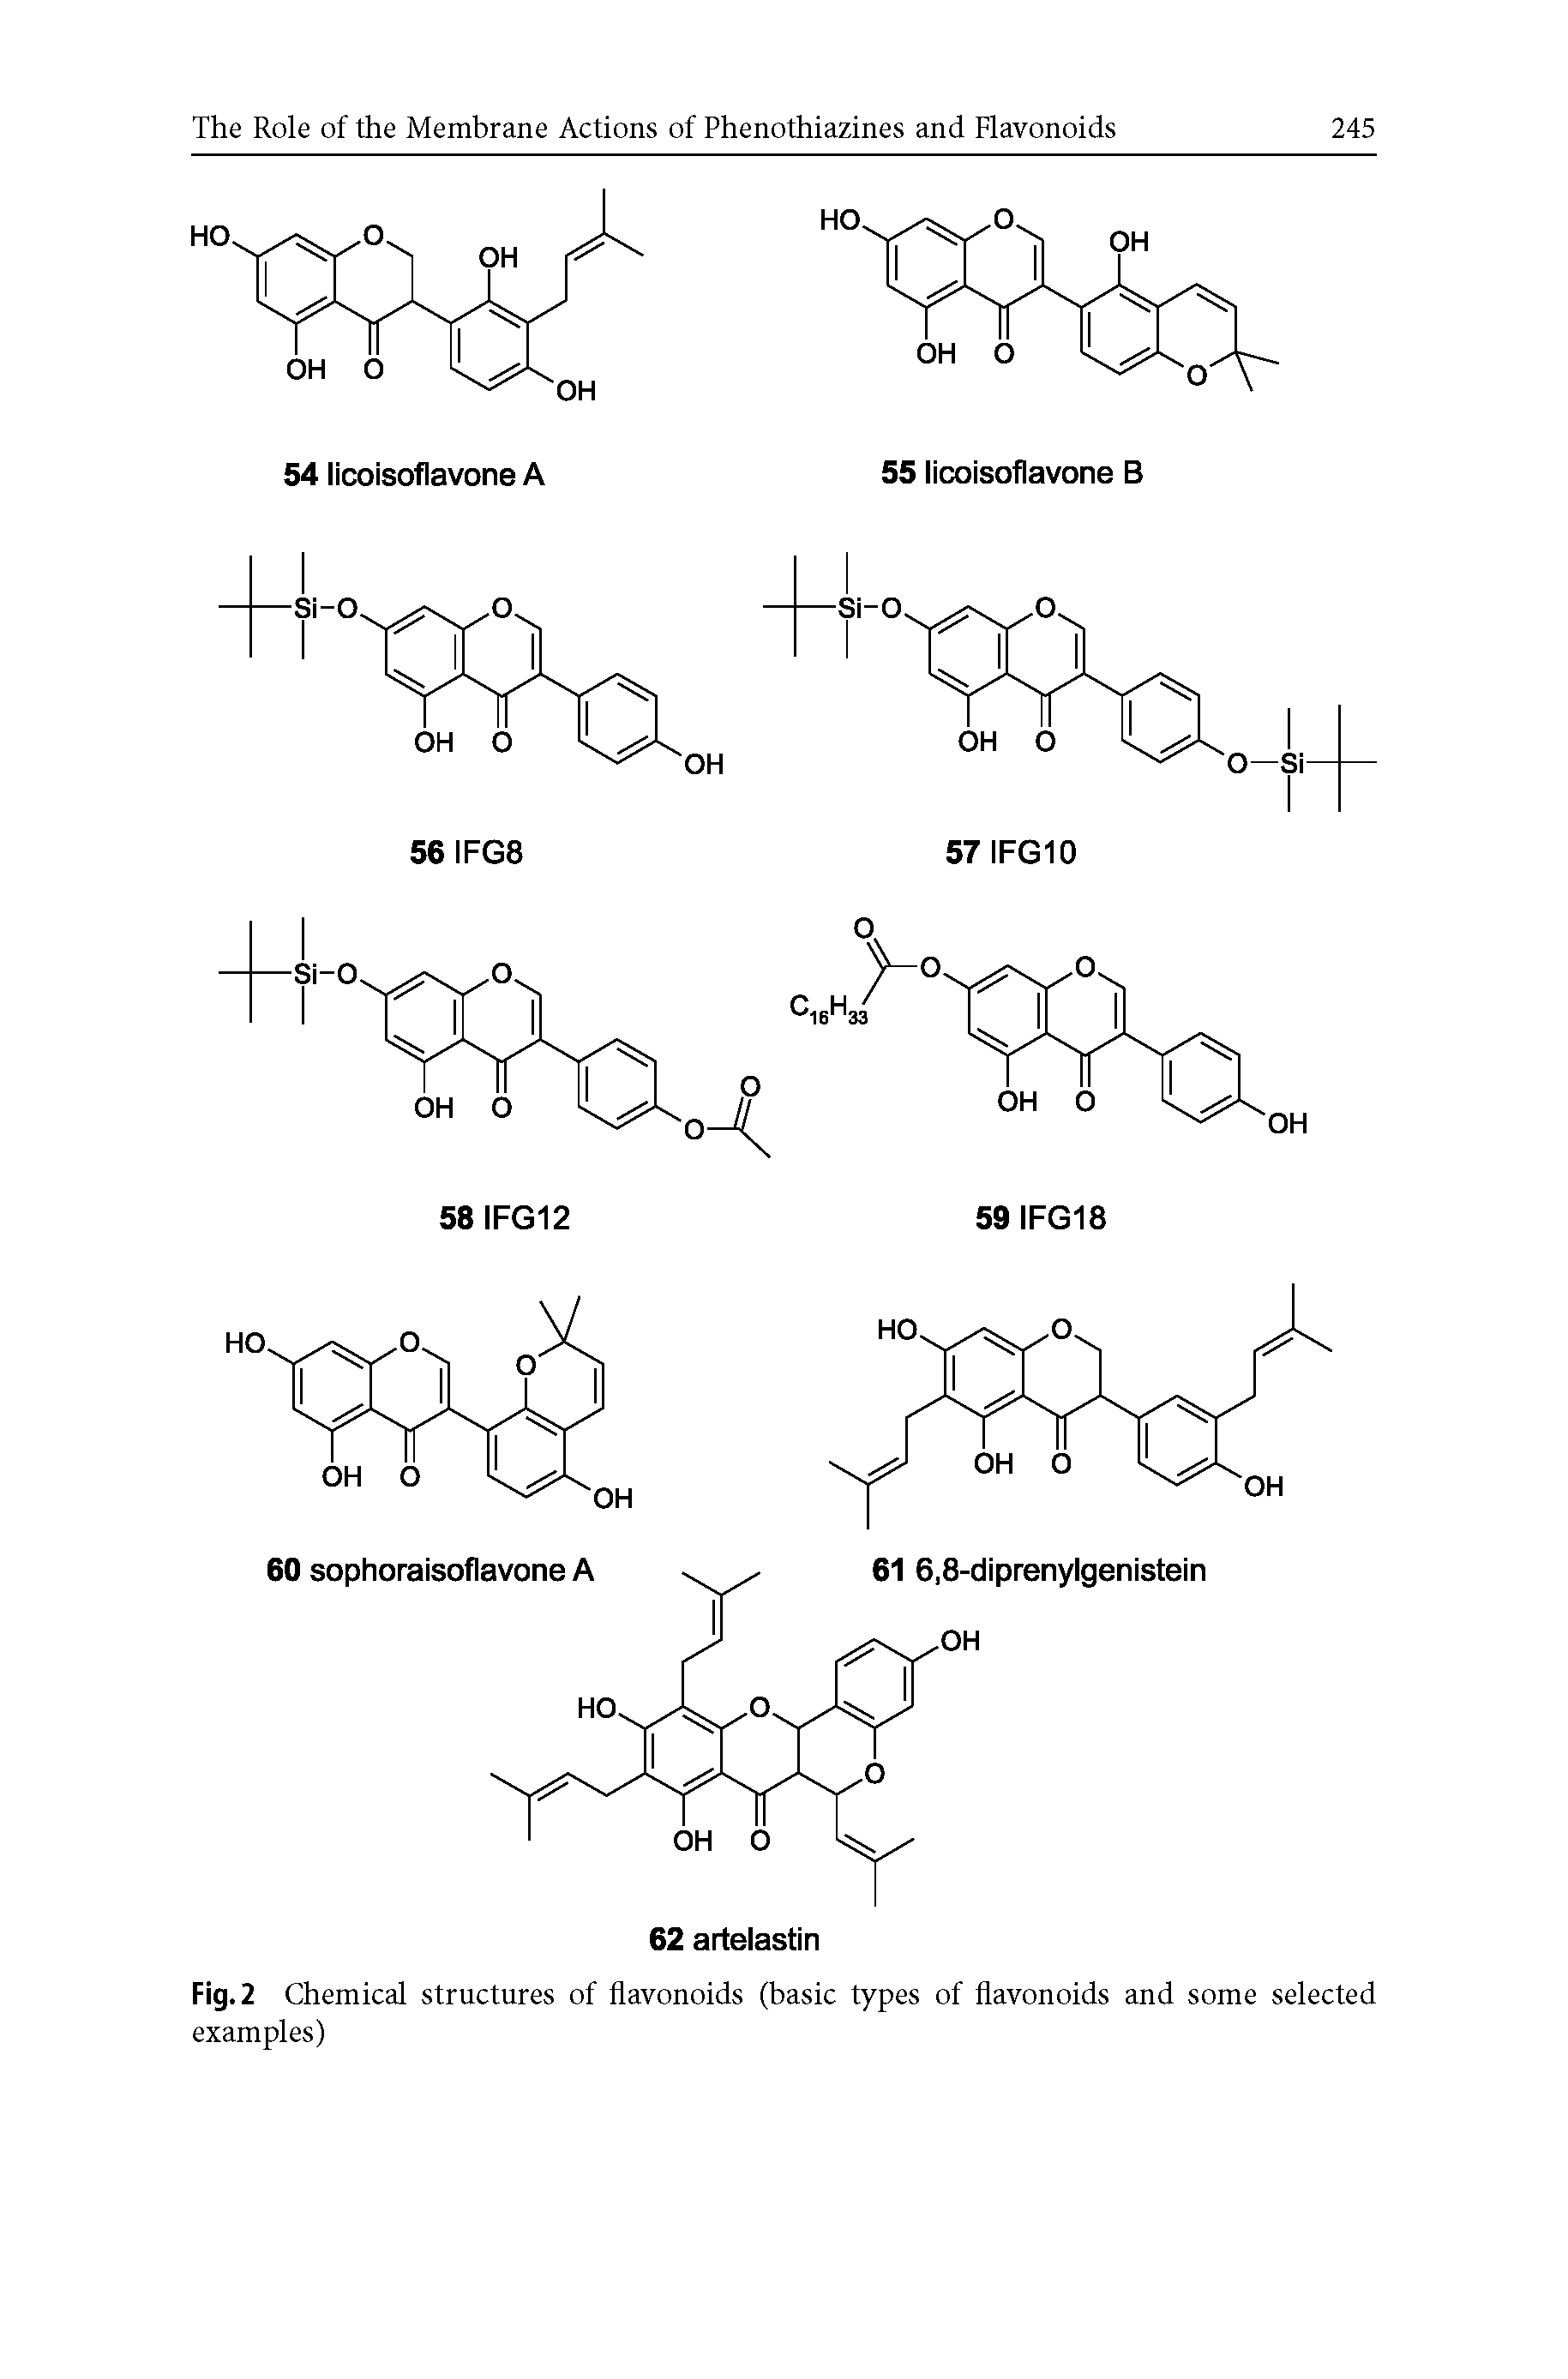 Fig. 2 Chemical structures of flavonoids (basic types of flavonoids and some selected examples)...